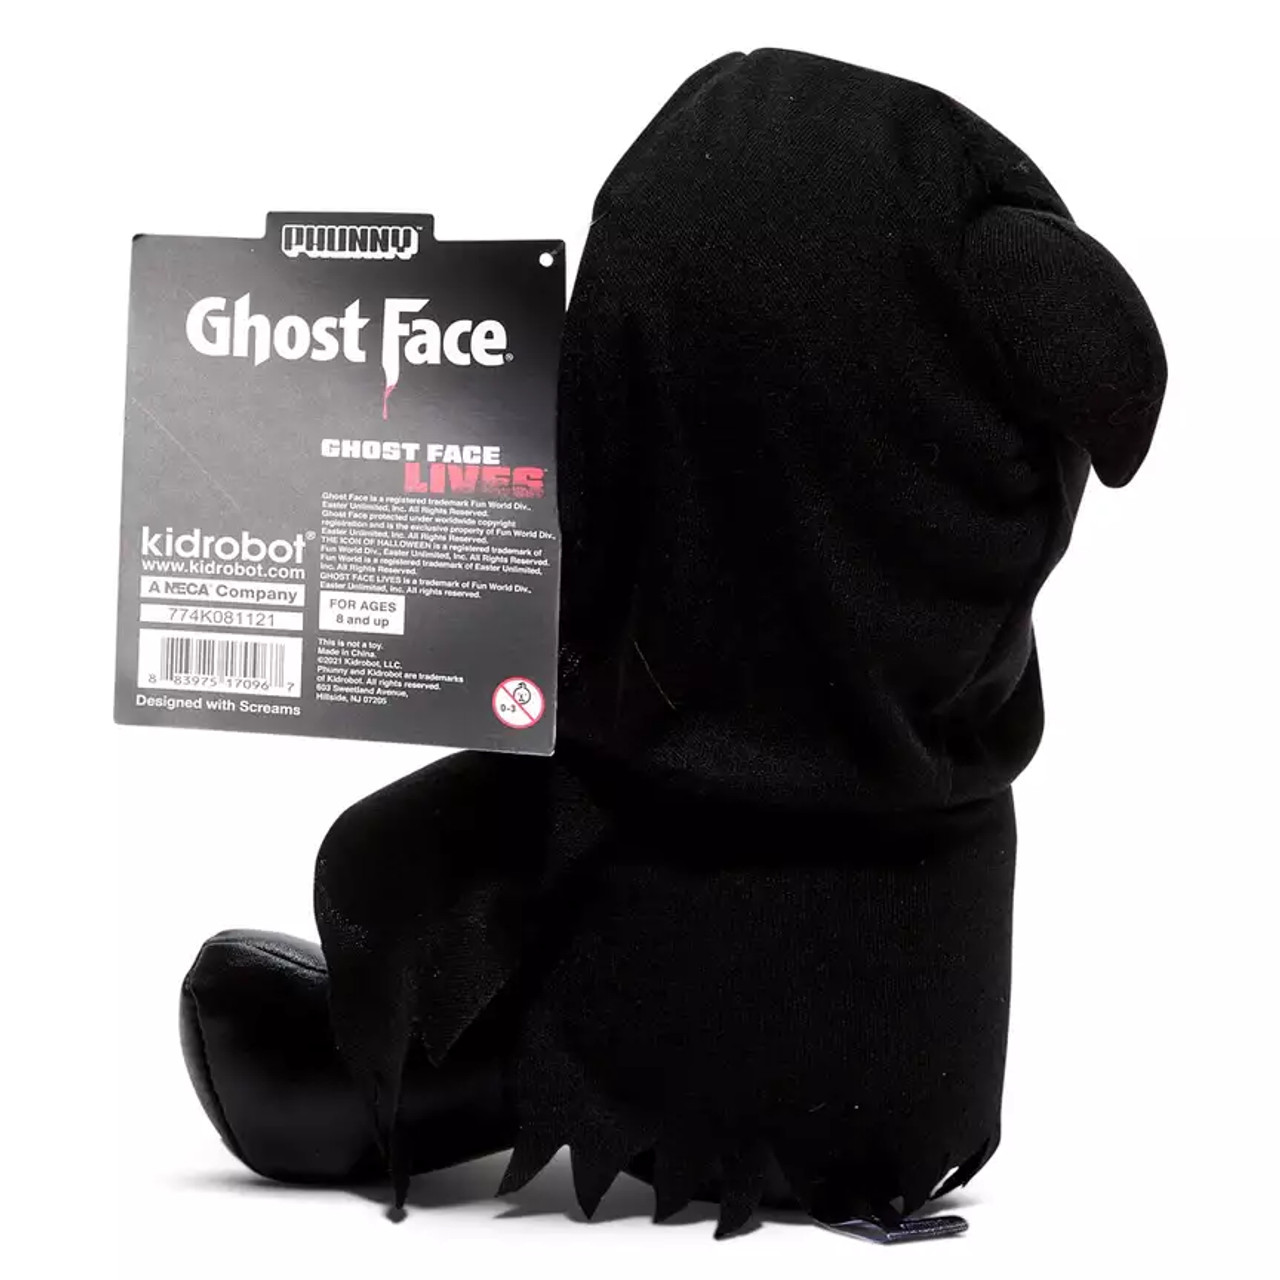 https://cdn11.bigcommerce.com/s-8j9ytfqbd1/images/stencil/1280x1280/products/873/8365/Scream-Ghost-Face-8-Phunny-Plush_4101__92078.1687294324.jpg?c=1?imbypass=on